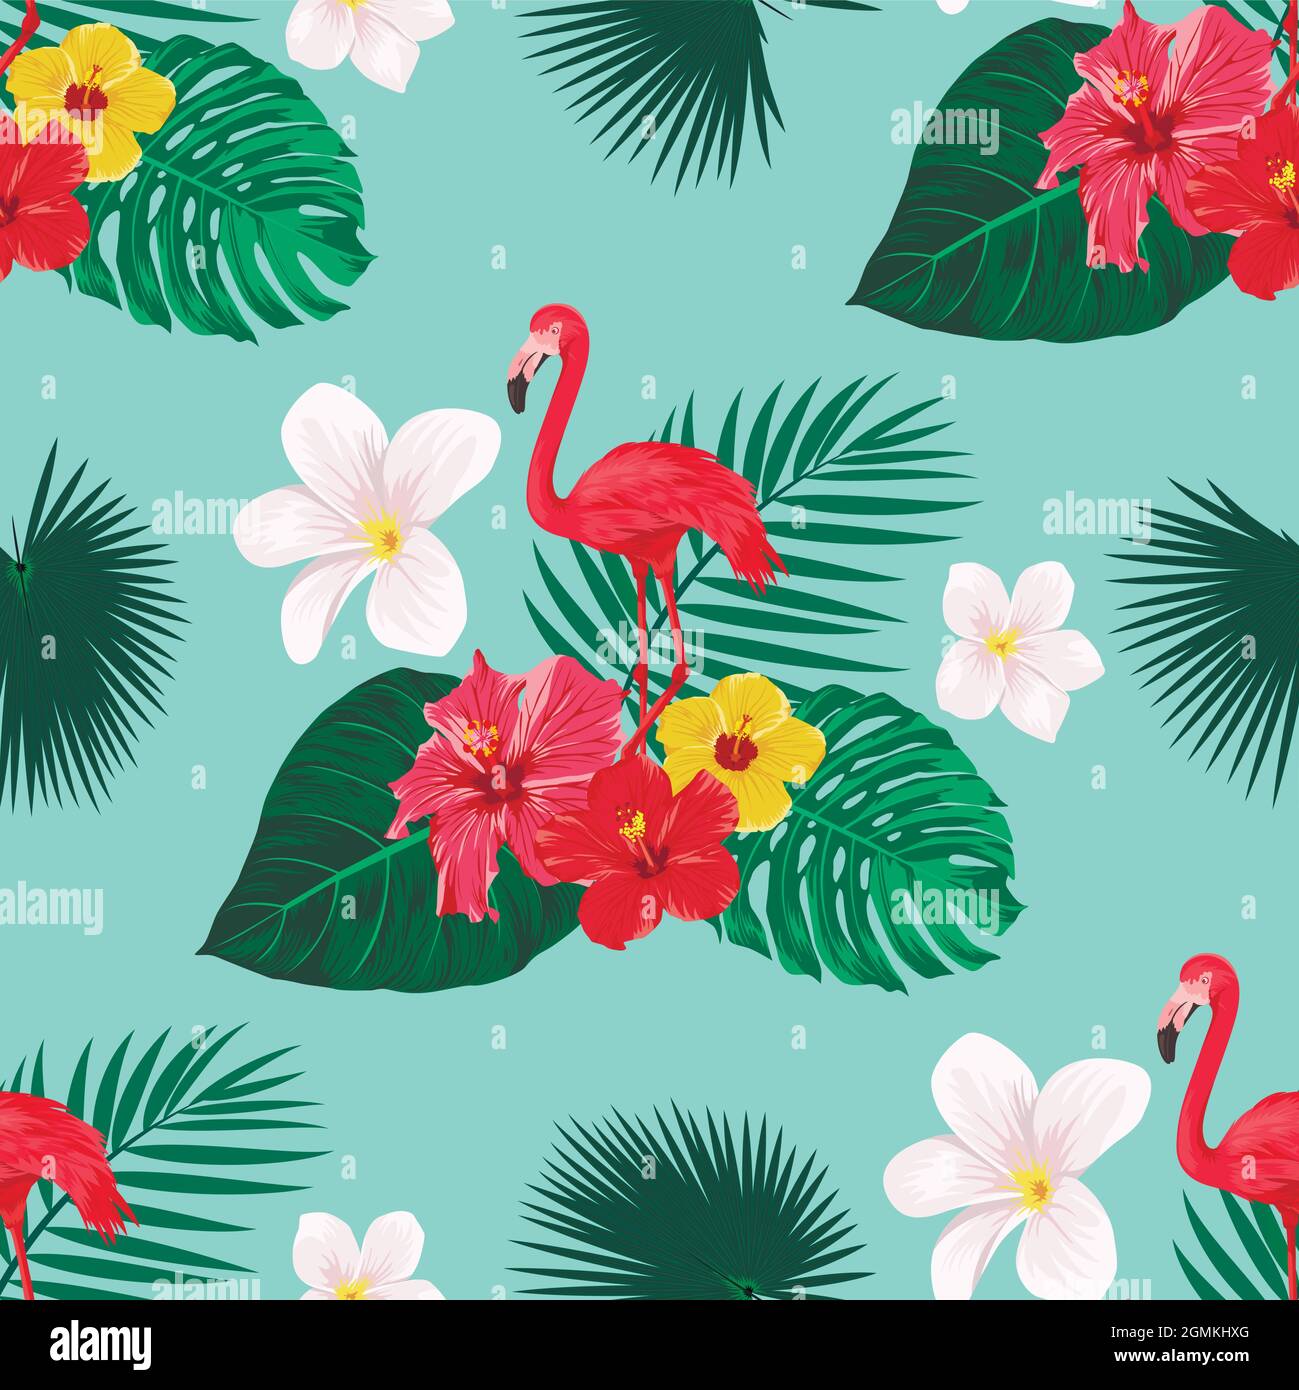 Seamless Pattern with Flamingo Bird, Tropical Leaves and Flowers. Repeated Tropical Background. Flat Vector Illustration. Africa, Savannh, Exotic Stock Vector